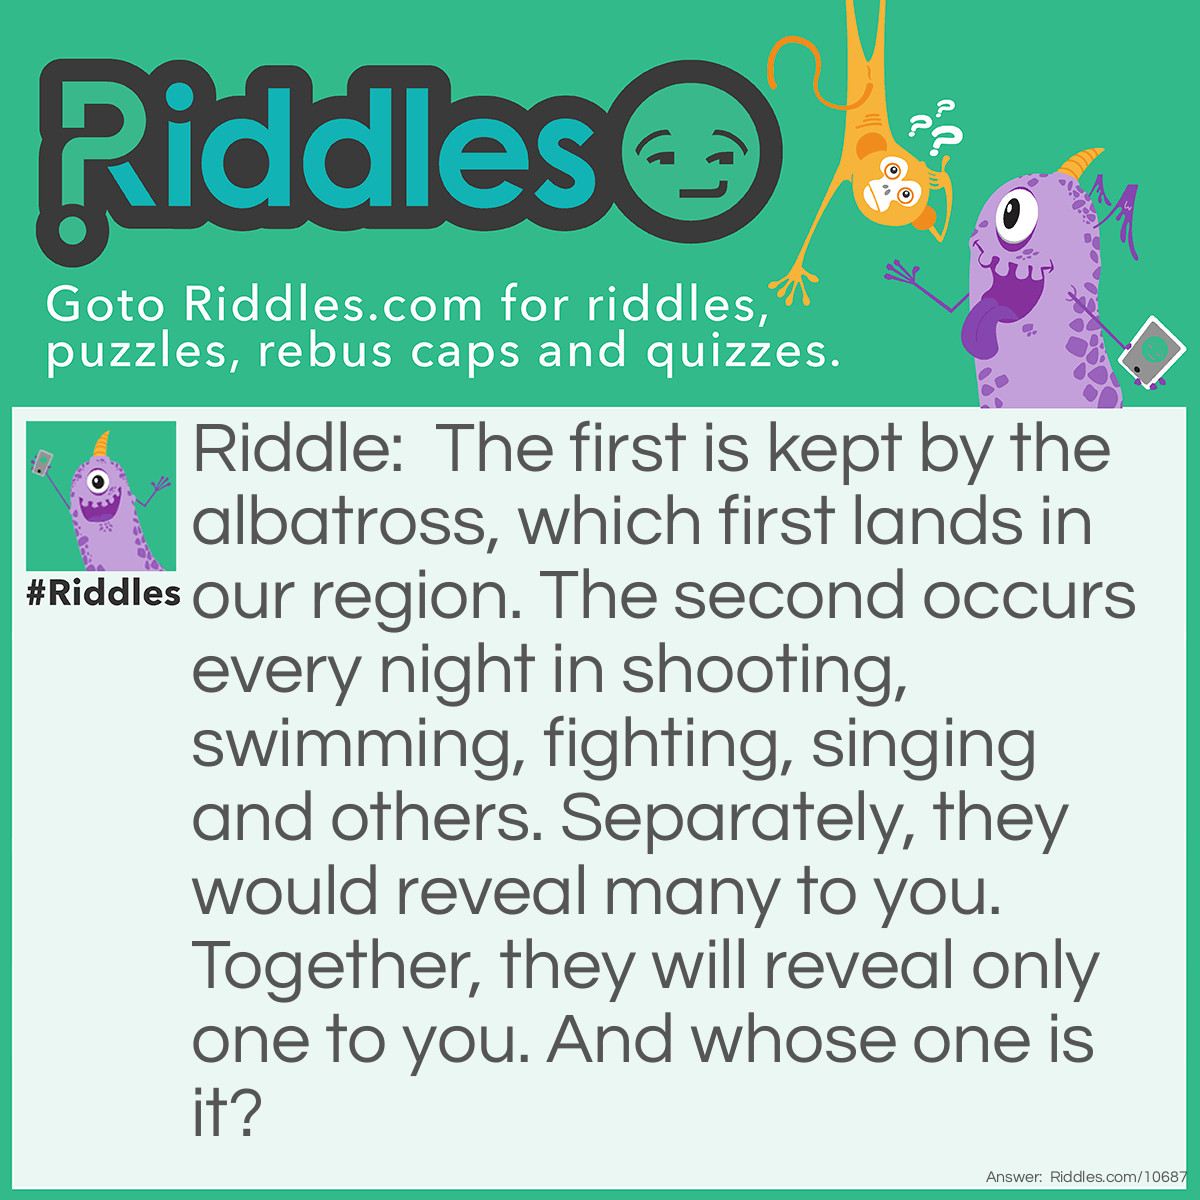 Riddle: The first is kept by the albatross, which first lands in our region. The second occurs every night in shooting, swimming, fighting, singing and others. Separately, they would reveal many to you. Together, they will reveal only one to you. And whose one is it? Answer: Unanswered